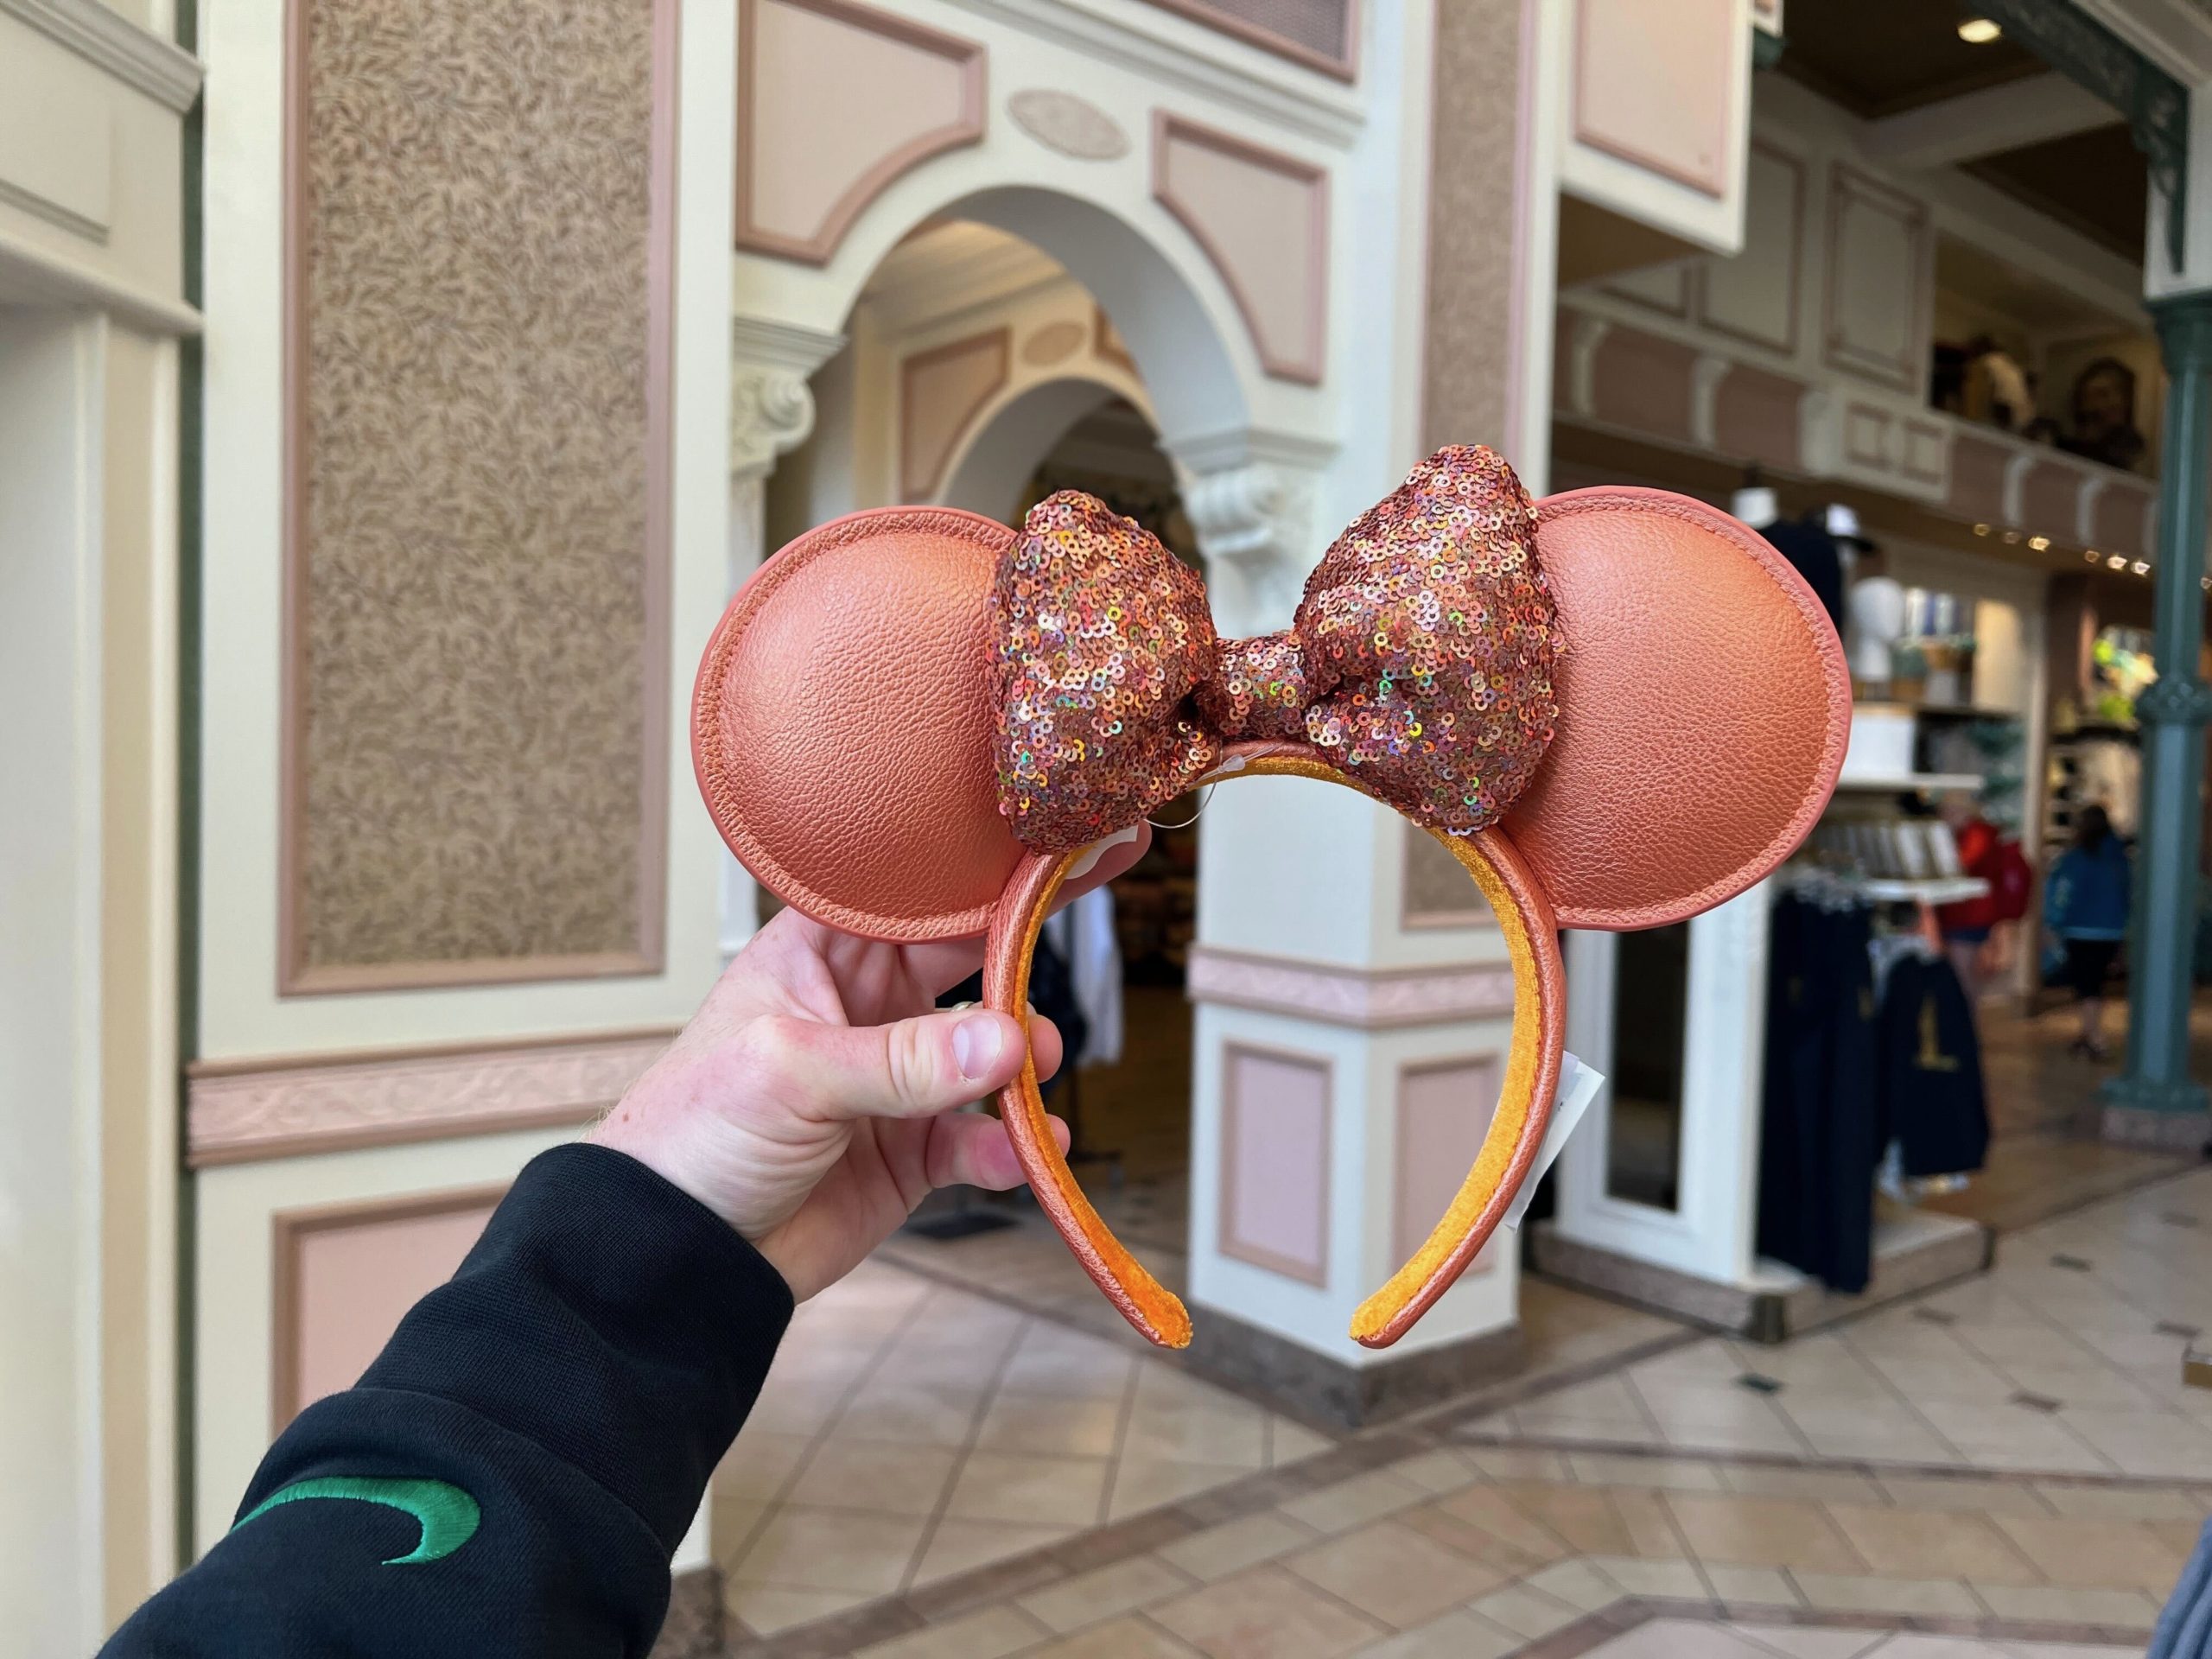 Rainbow Sequined Minnie Mouse Ears Are Coming to Disney Parks